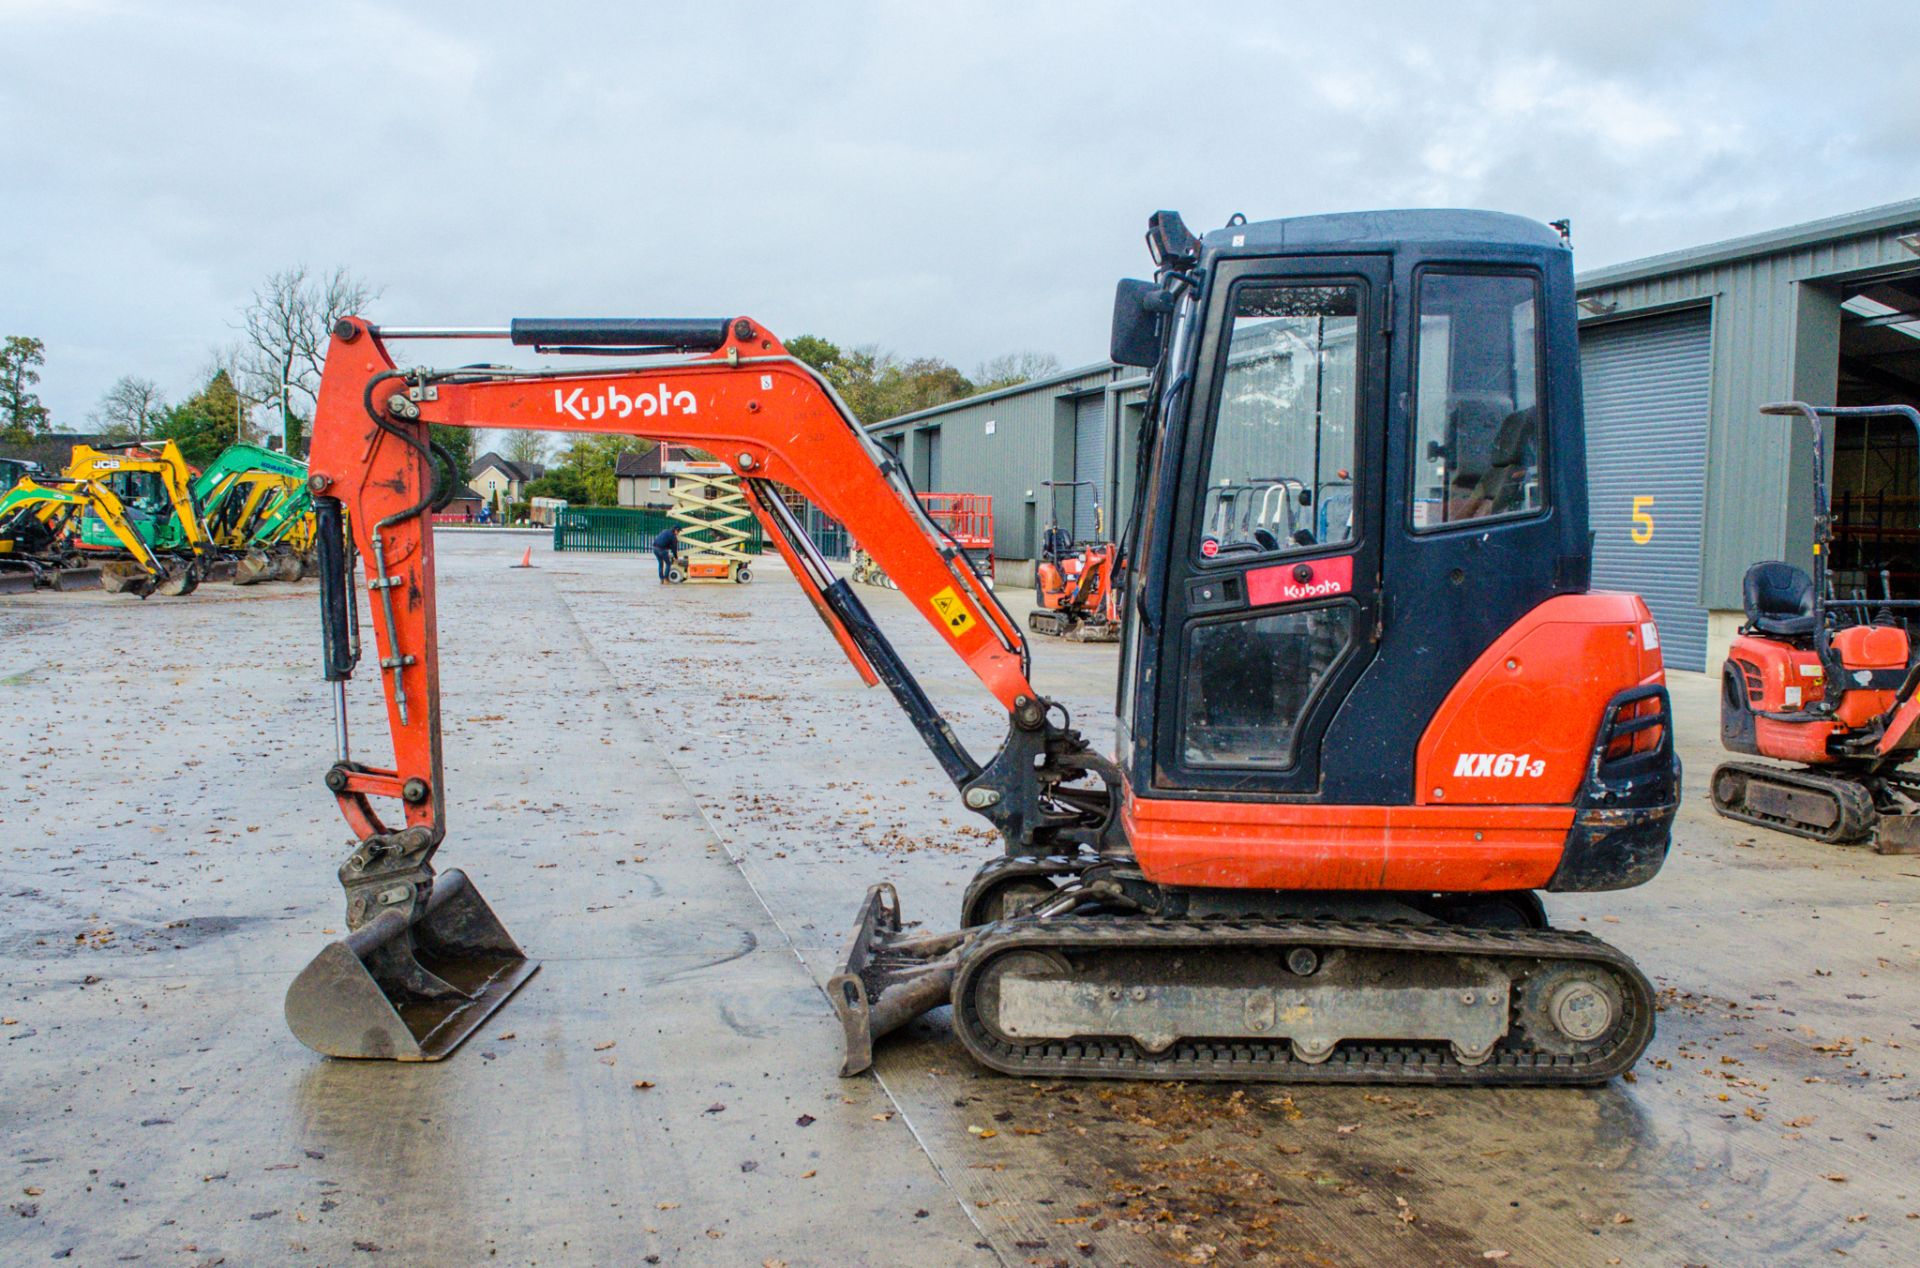 Kubota KX61-3 2.6 tonne rubber tracked excavator Year: 2015 S/N: 81787 Recorded Hours: 2860 EXC149 - Image 6 of 18